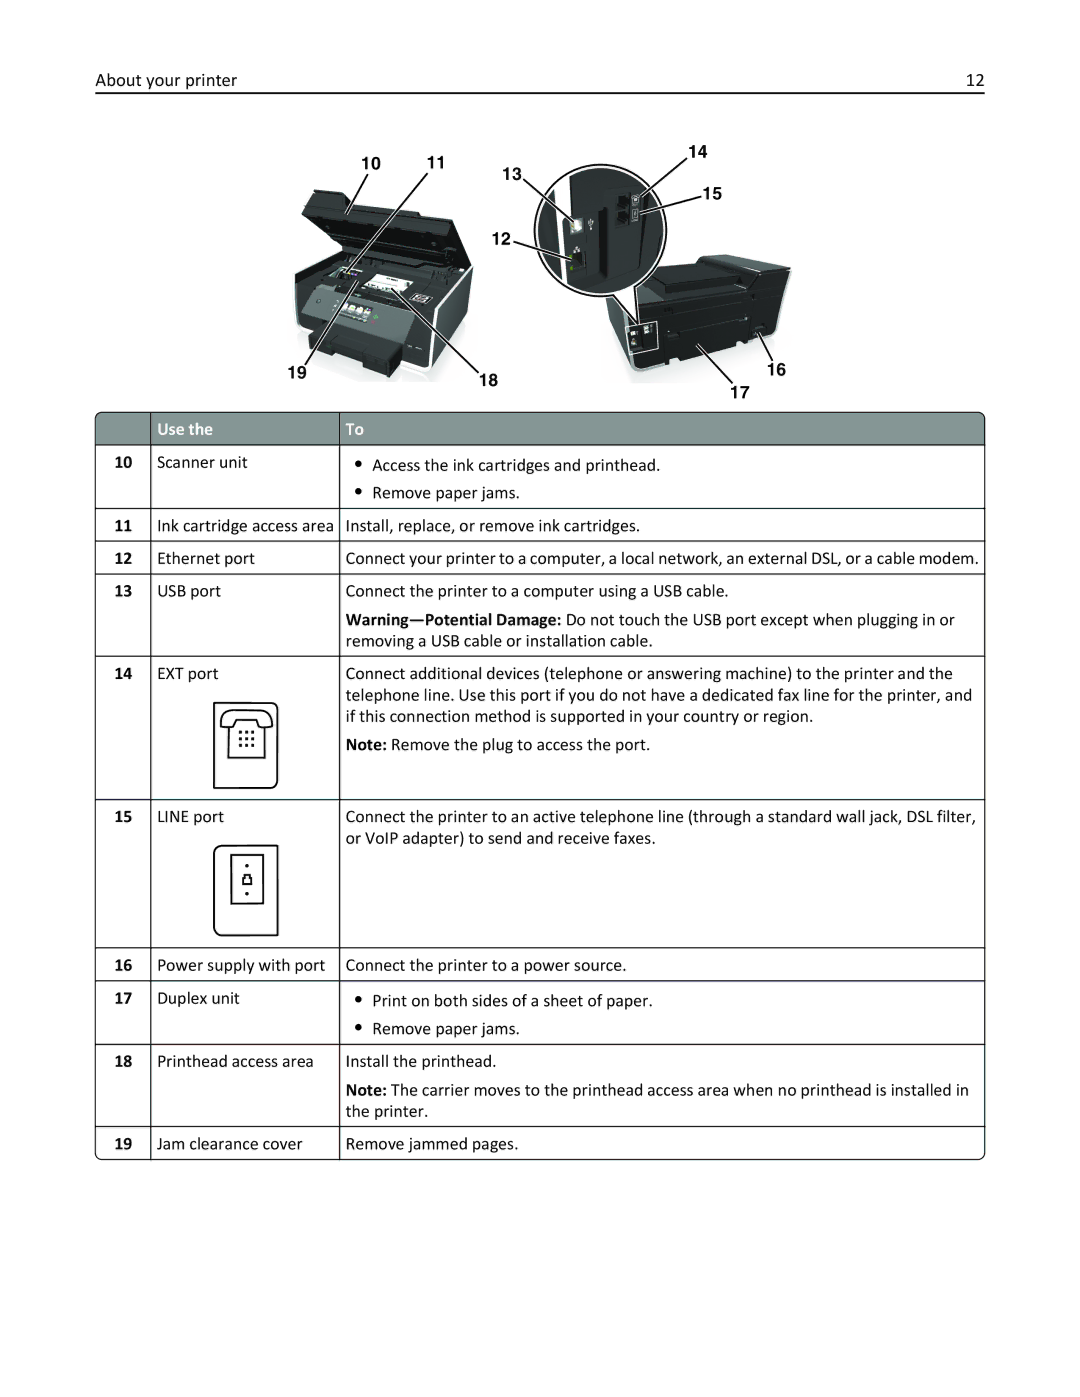 Lexmark 91E, 901, 90T9251, 90E, 90T9250, 90T9200, Pro915 manual Scanner unit Access the ink cartridges and printhead 